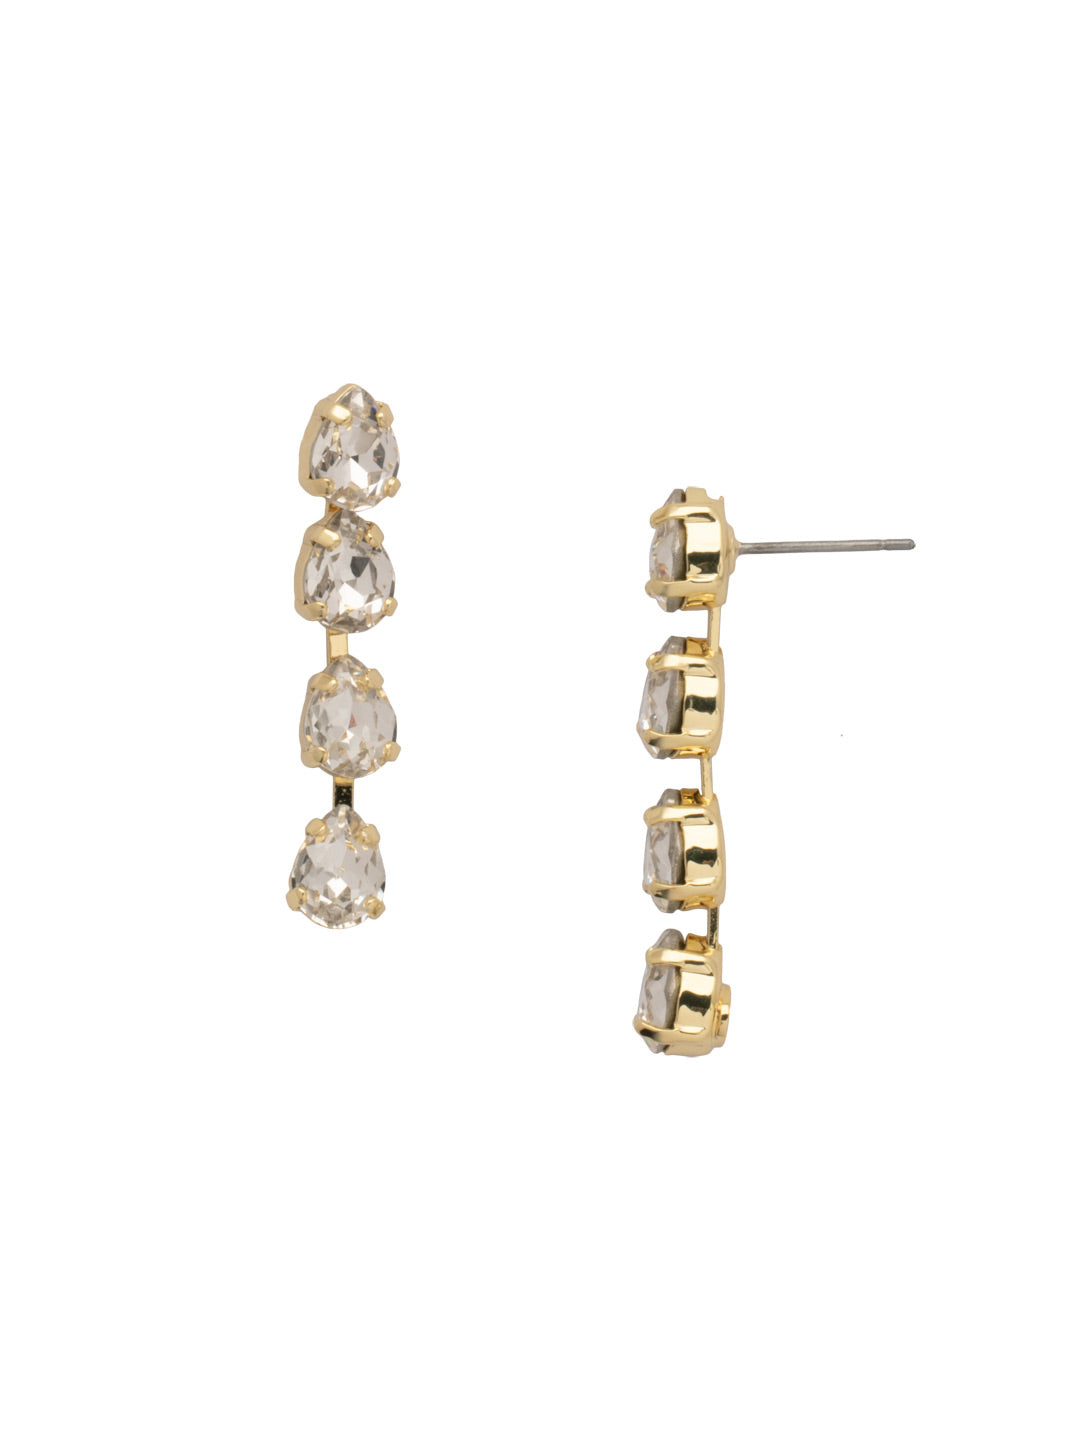 Perrie Dangle Earrings - 4EFJ2BGCRY - <p>The Perrie Dangle Earrings feature four pear cut crystals dangling from a post. From Sorrelli's Crystal collection in our Bright Gold-tone finish.</p>